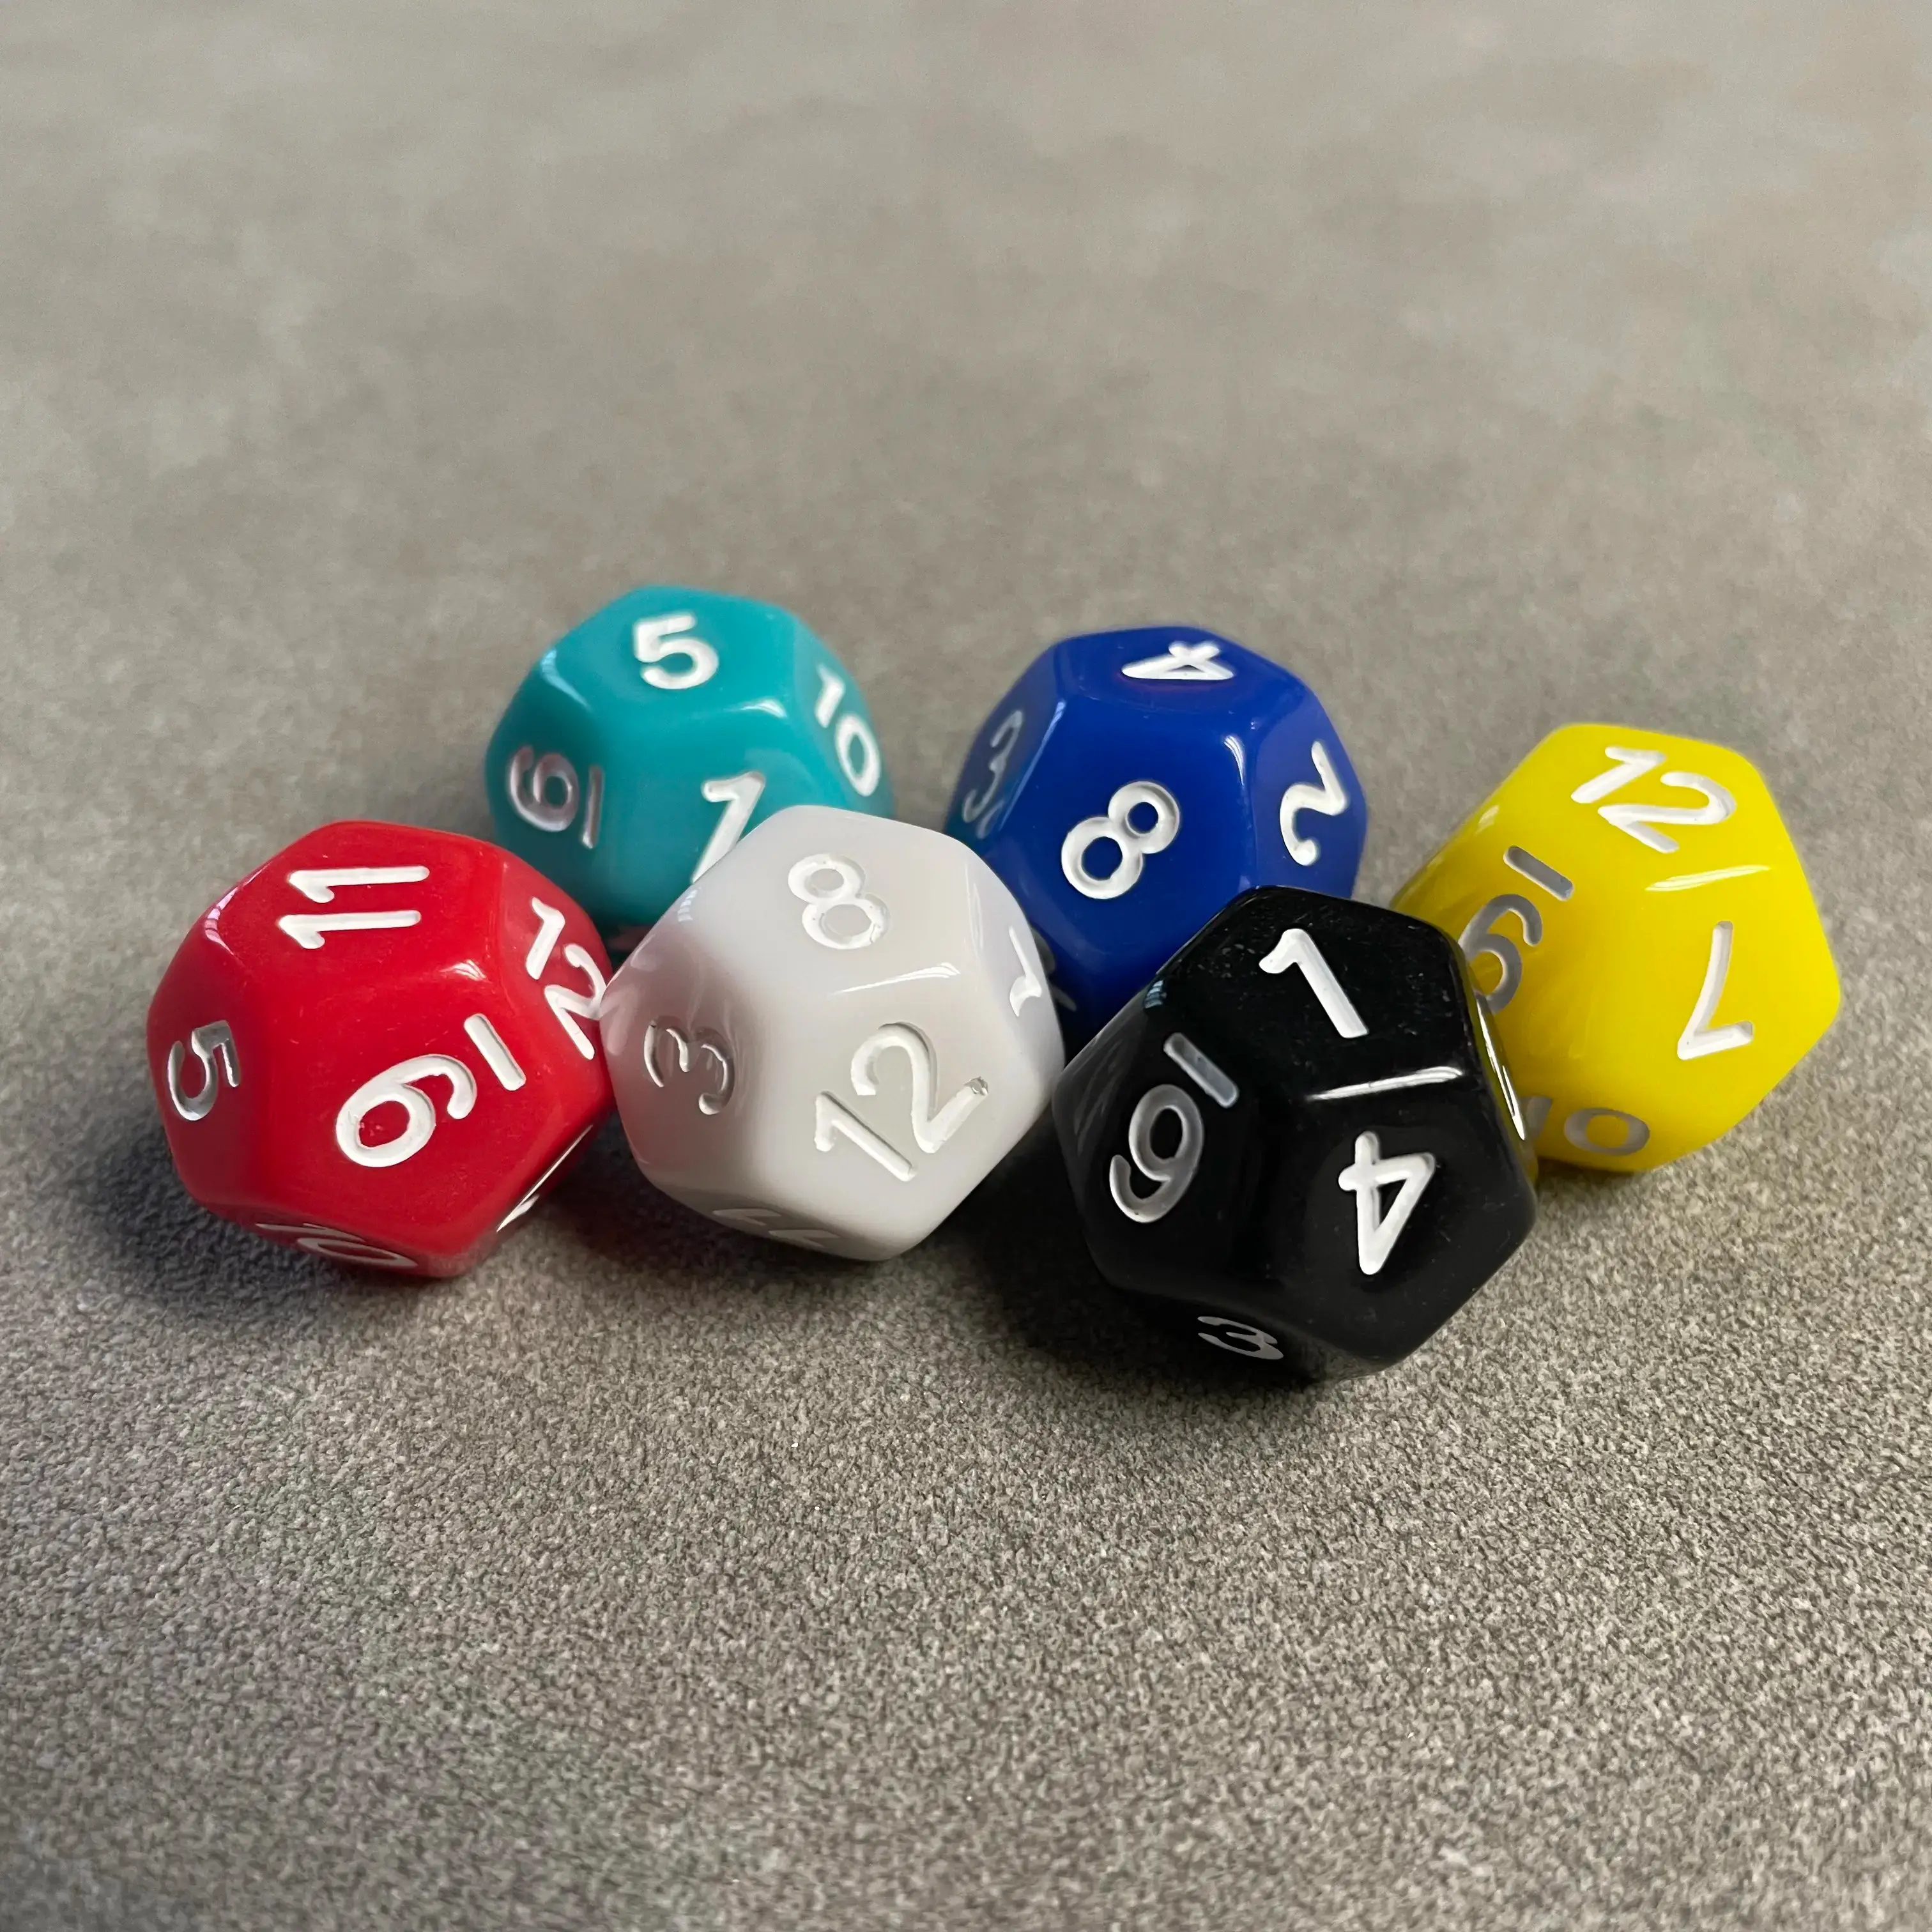 Colour-blind-friendly dice are now available on Launch Lab